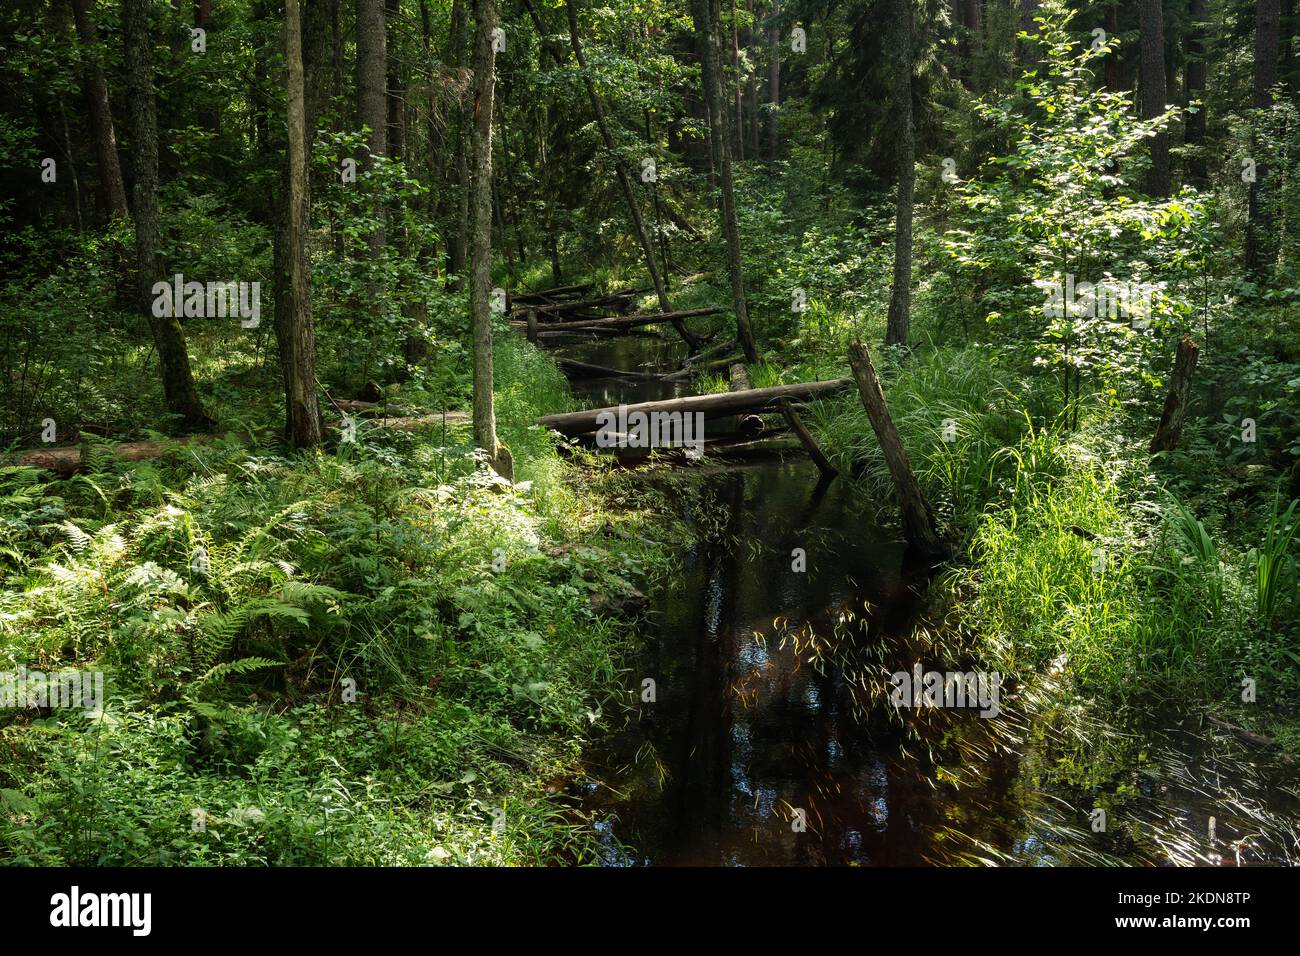 A view to summery Toonoja river surrounded with lush vegetation in Soomaa National Park, Estonia. Stock Photo